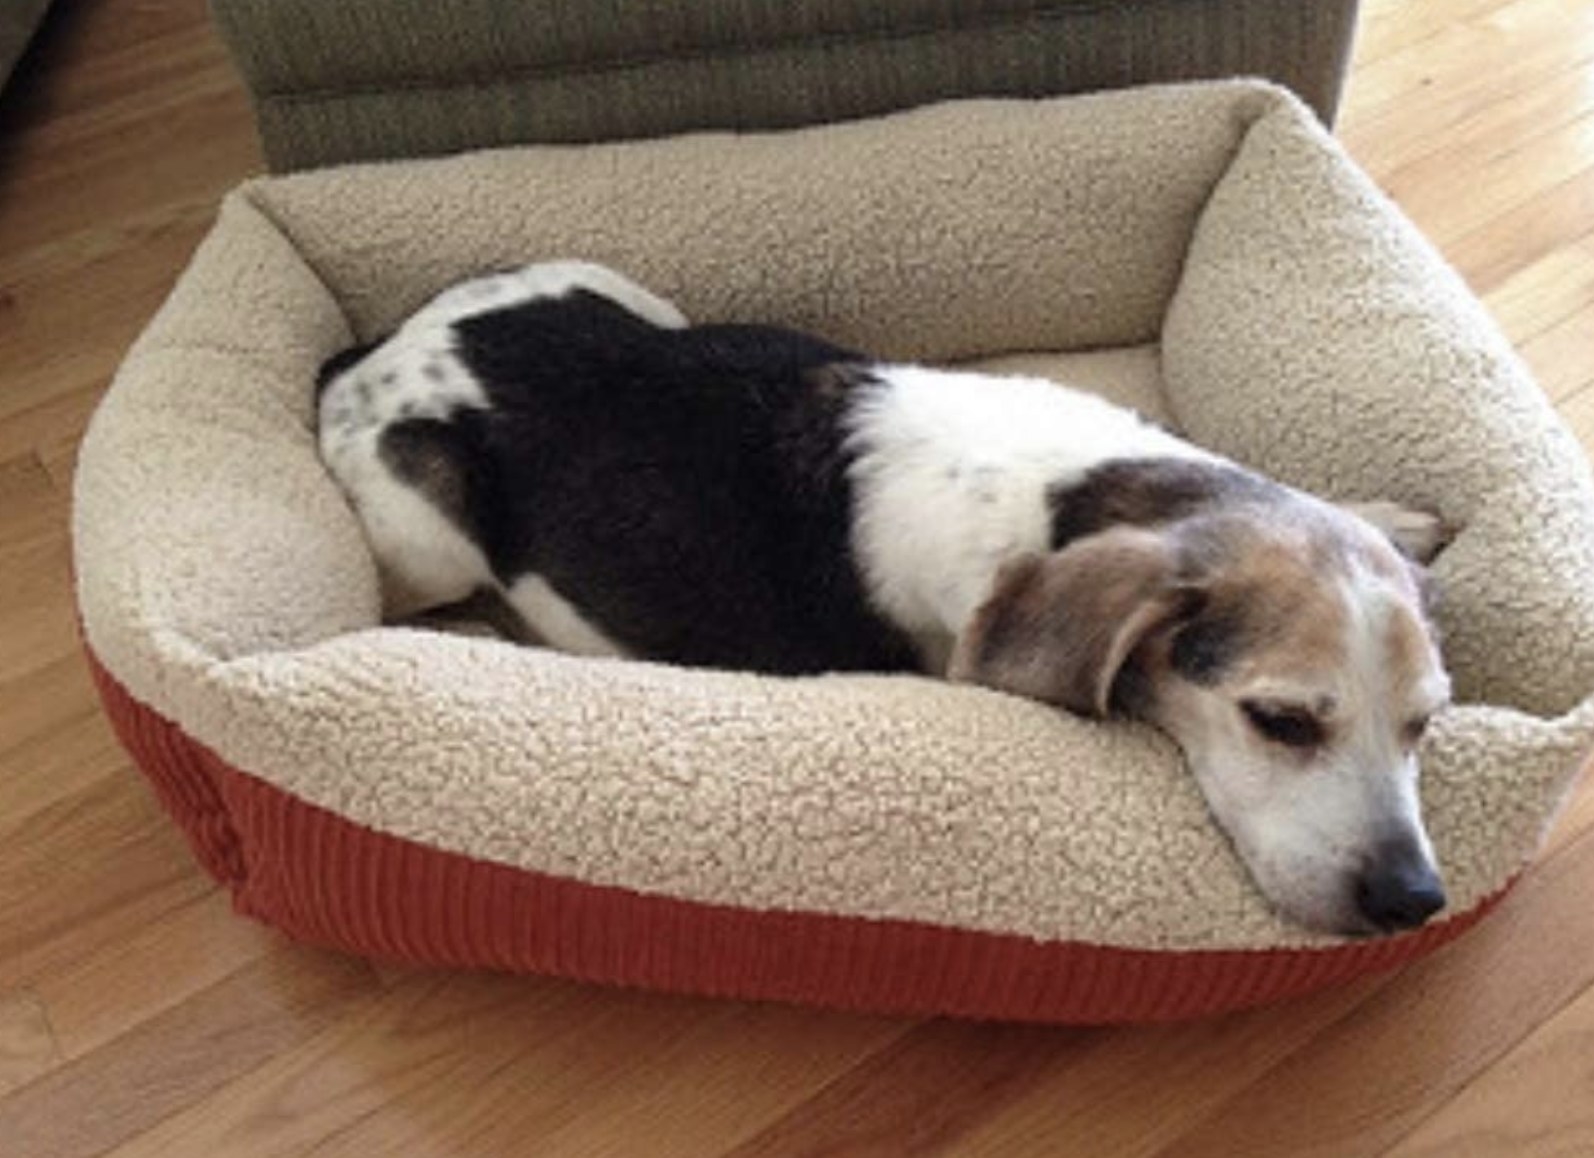 Reviewer photo showing their dog laying in the dog bed